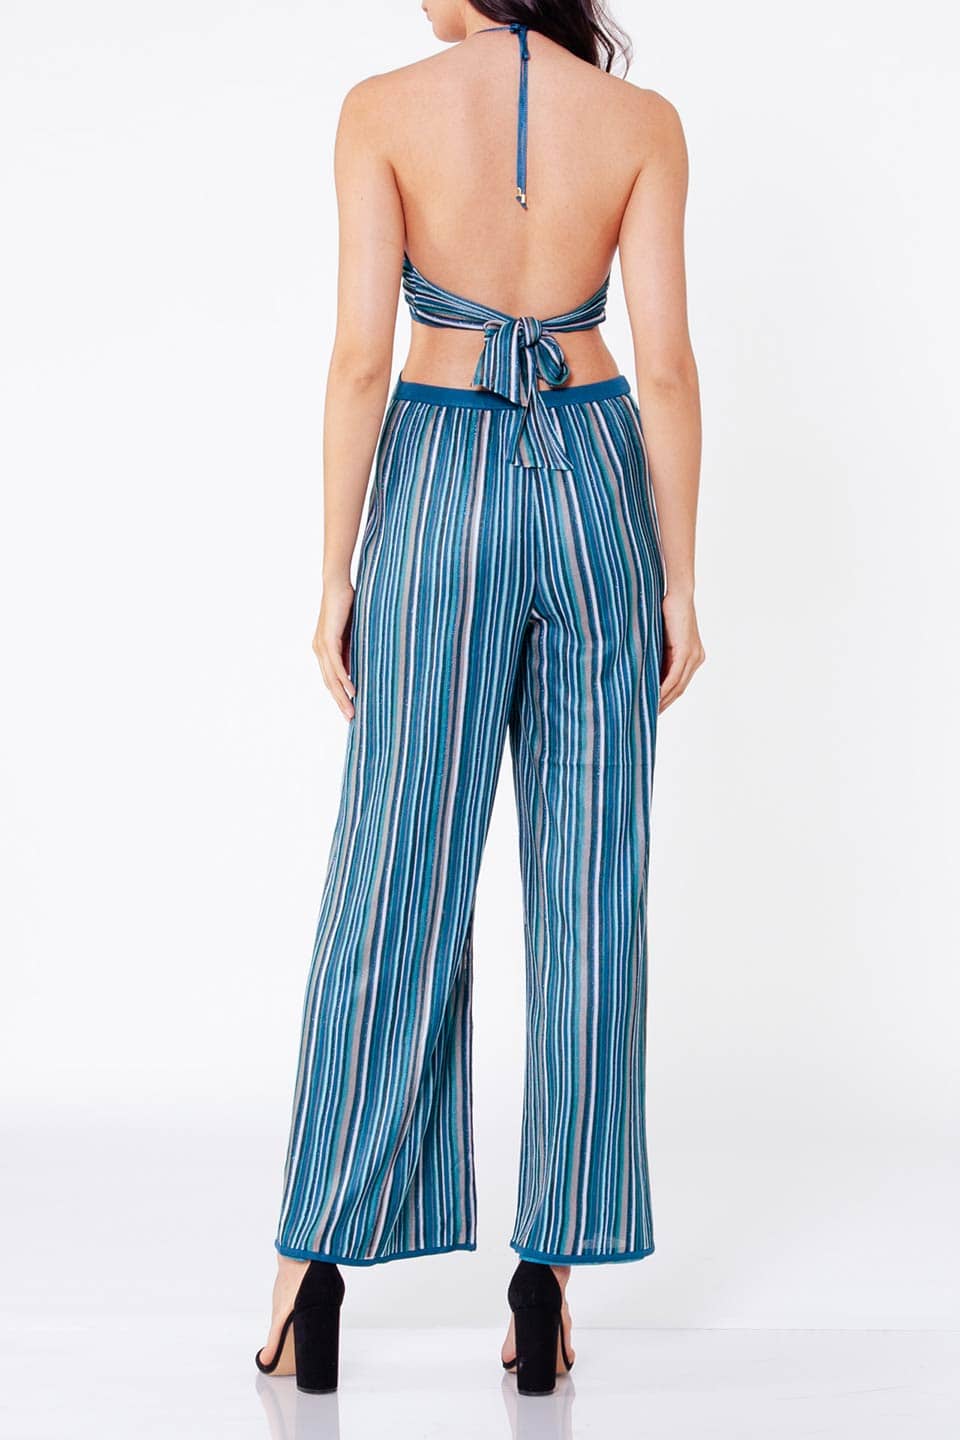 Thumbnail for Product gallery 2, Leonnie Jumpsuit